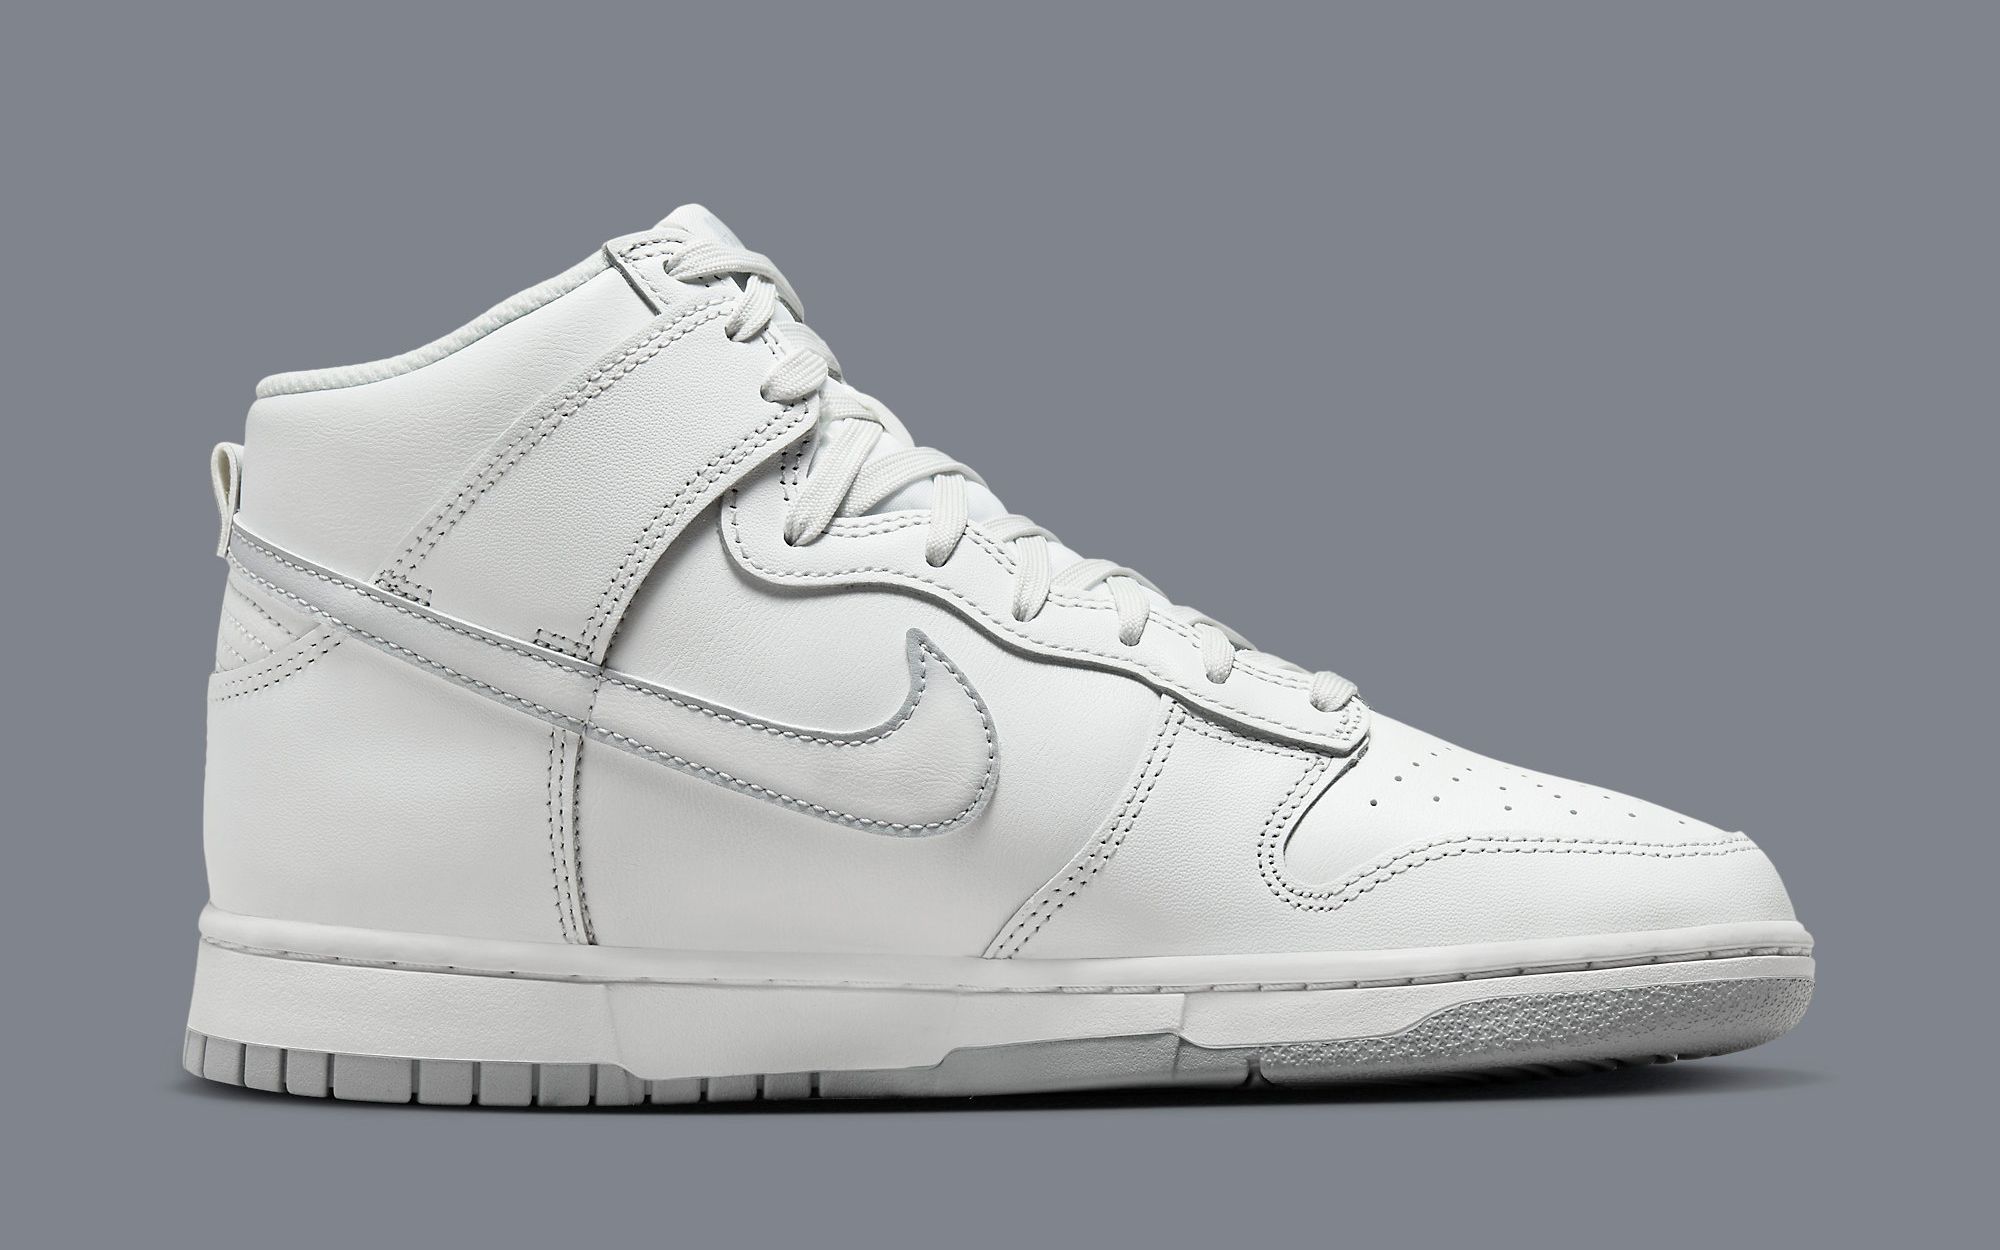 Nike Dunk High Airbrush Swoosh - White Mens Shoes Size 8-12 new sneakers